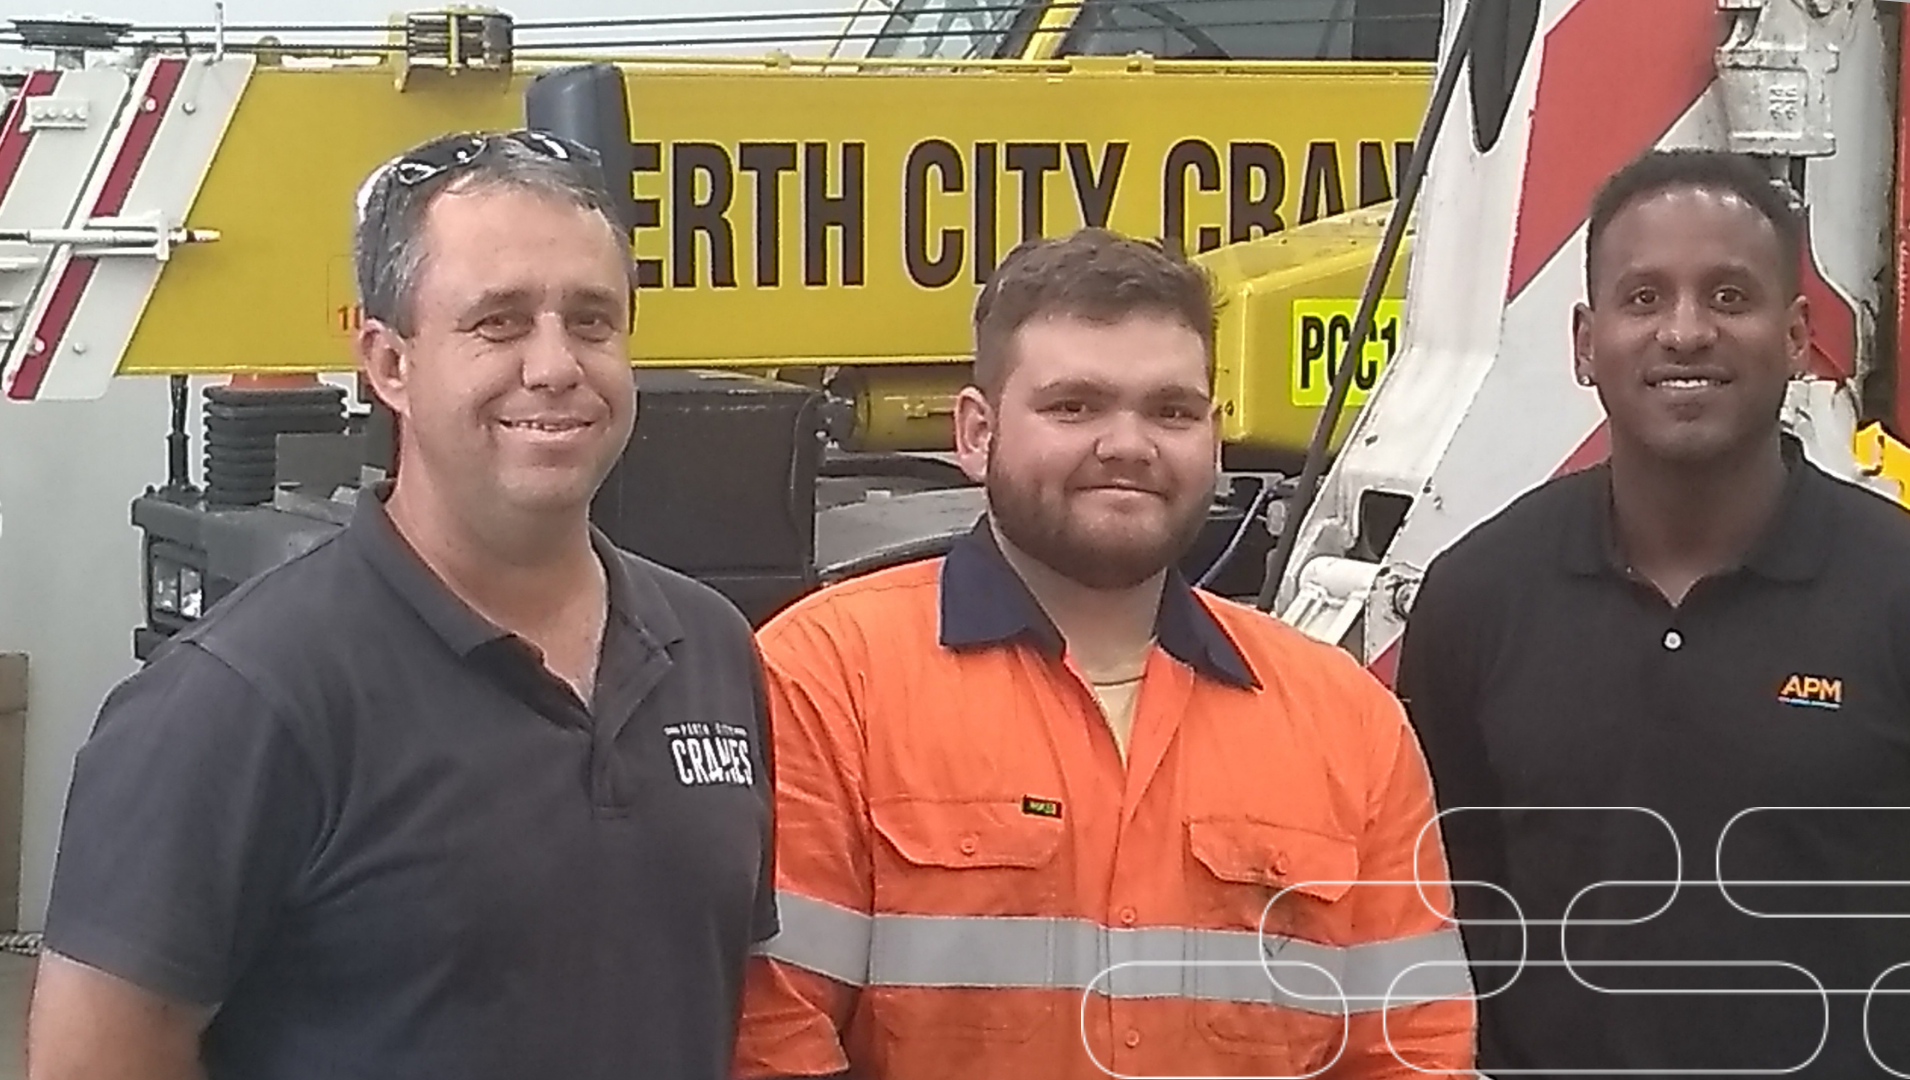 Jake stands in his hi-vis work uniform next to his boss and his APM consultant